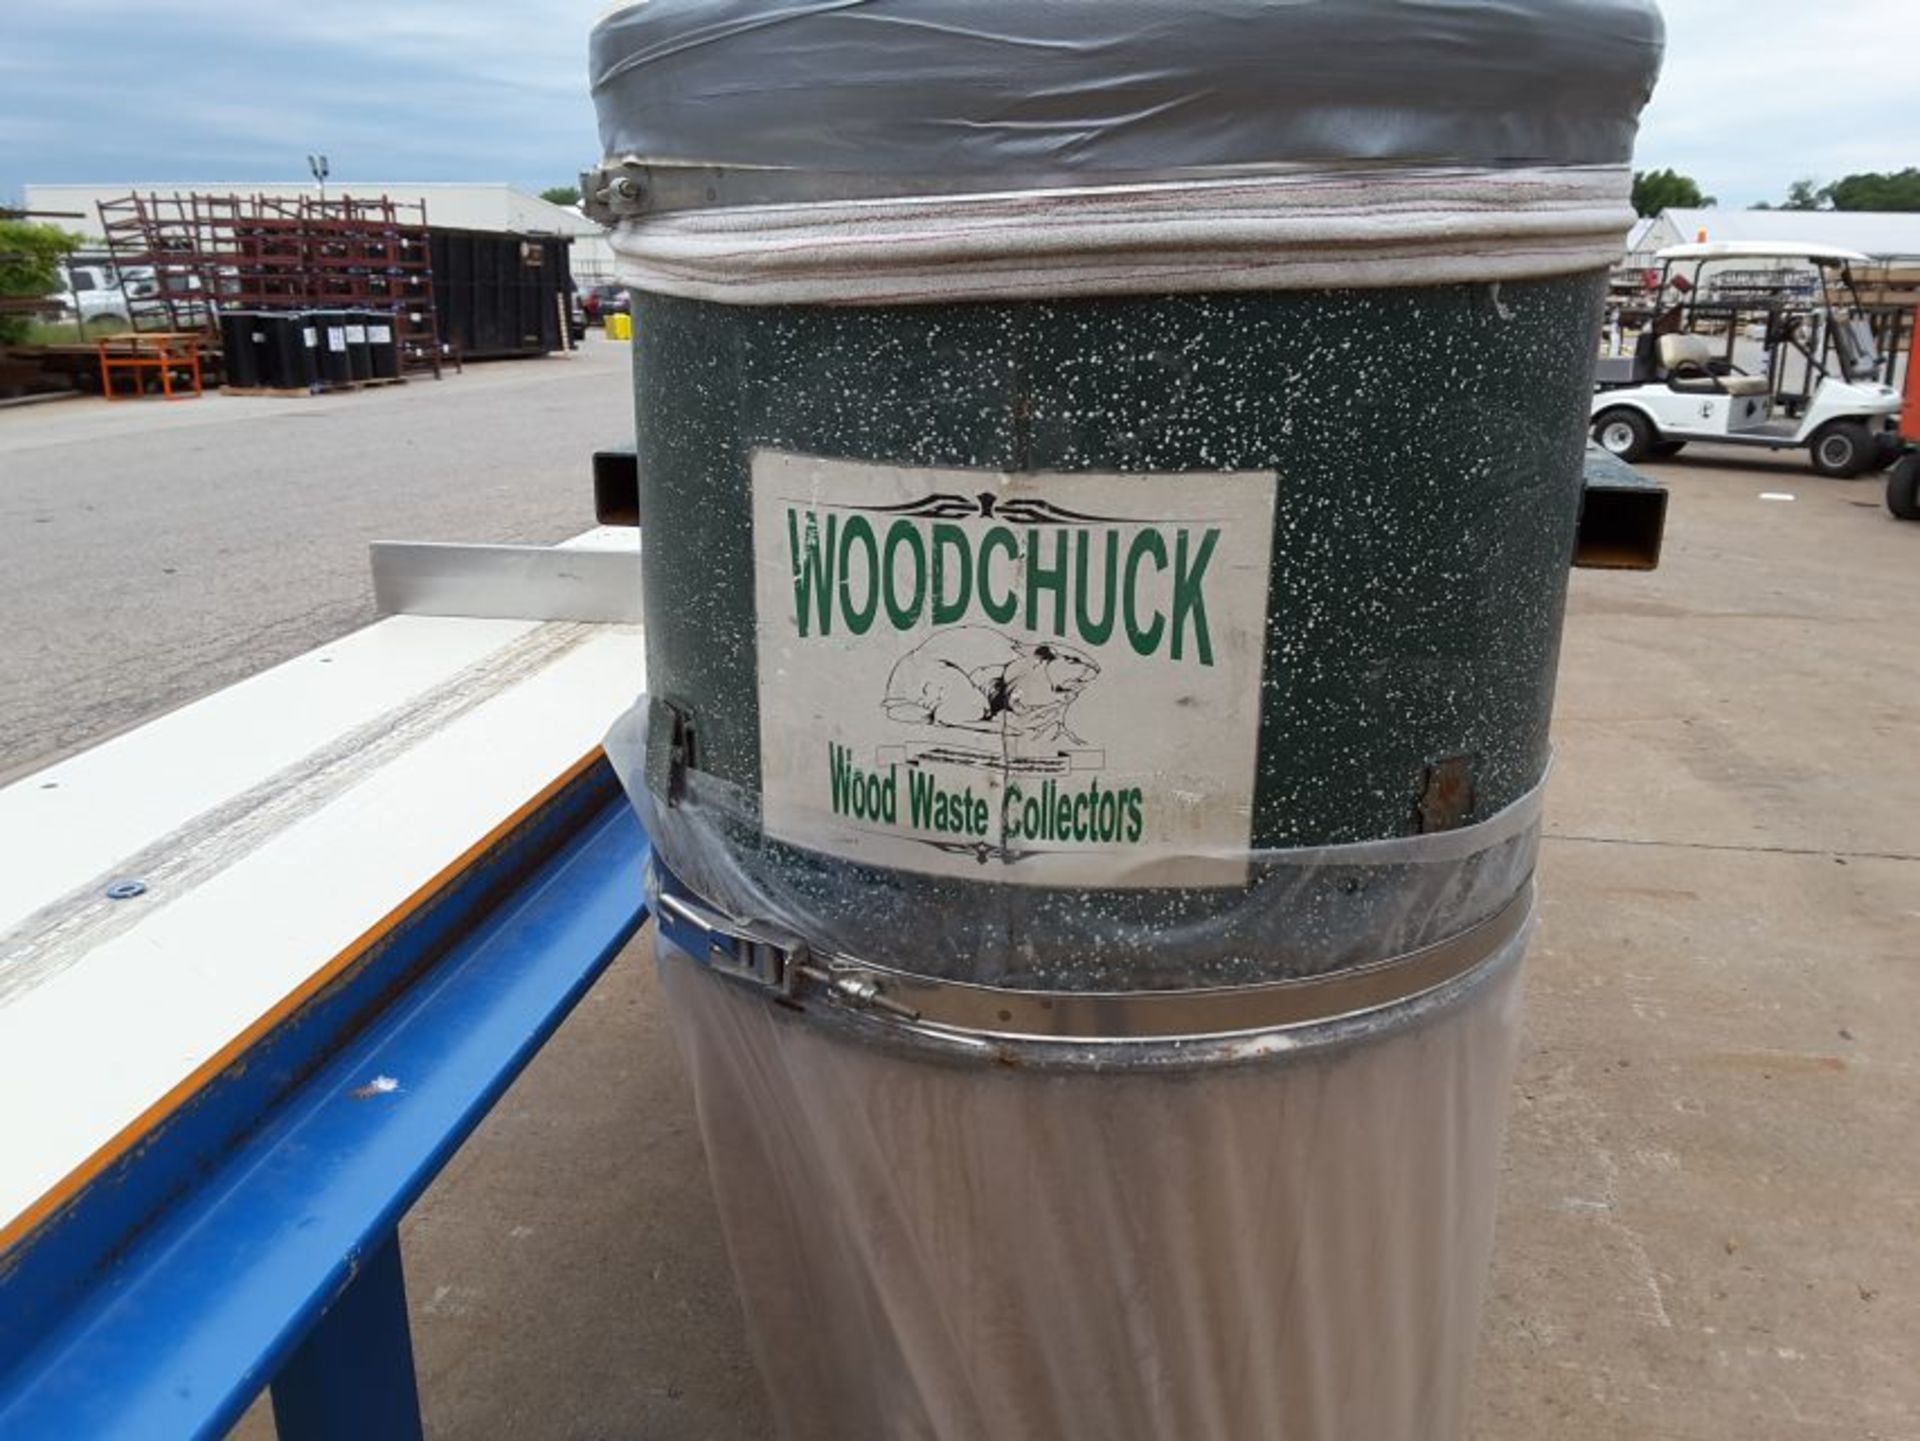 Woodchuck Dust Collector - Image 5 of 5